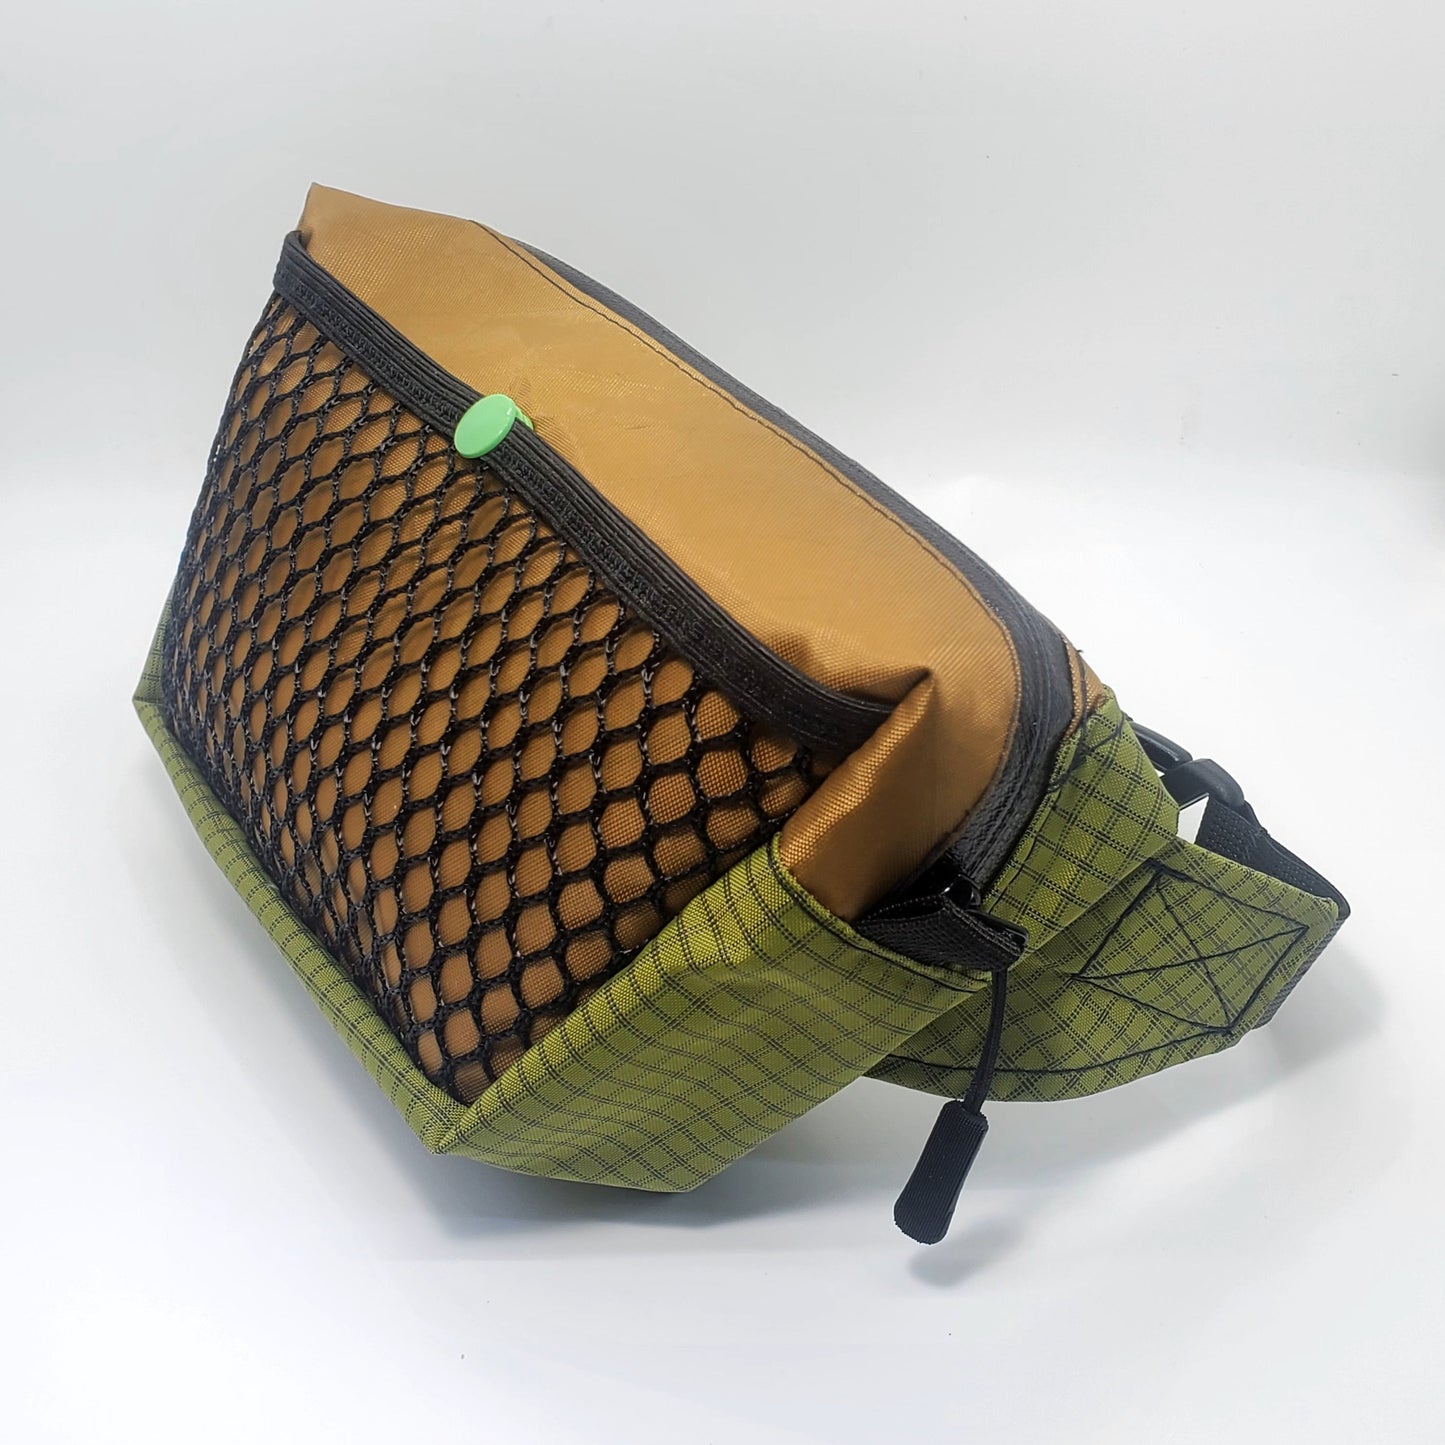 Coyote and Avocado UL Fanny Pack for hiking and Backpacking